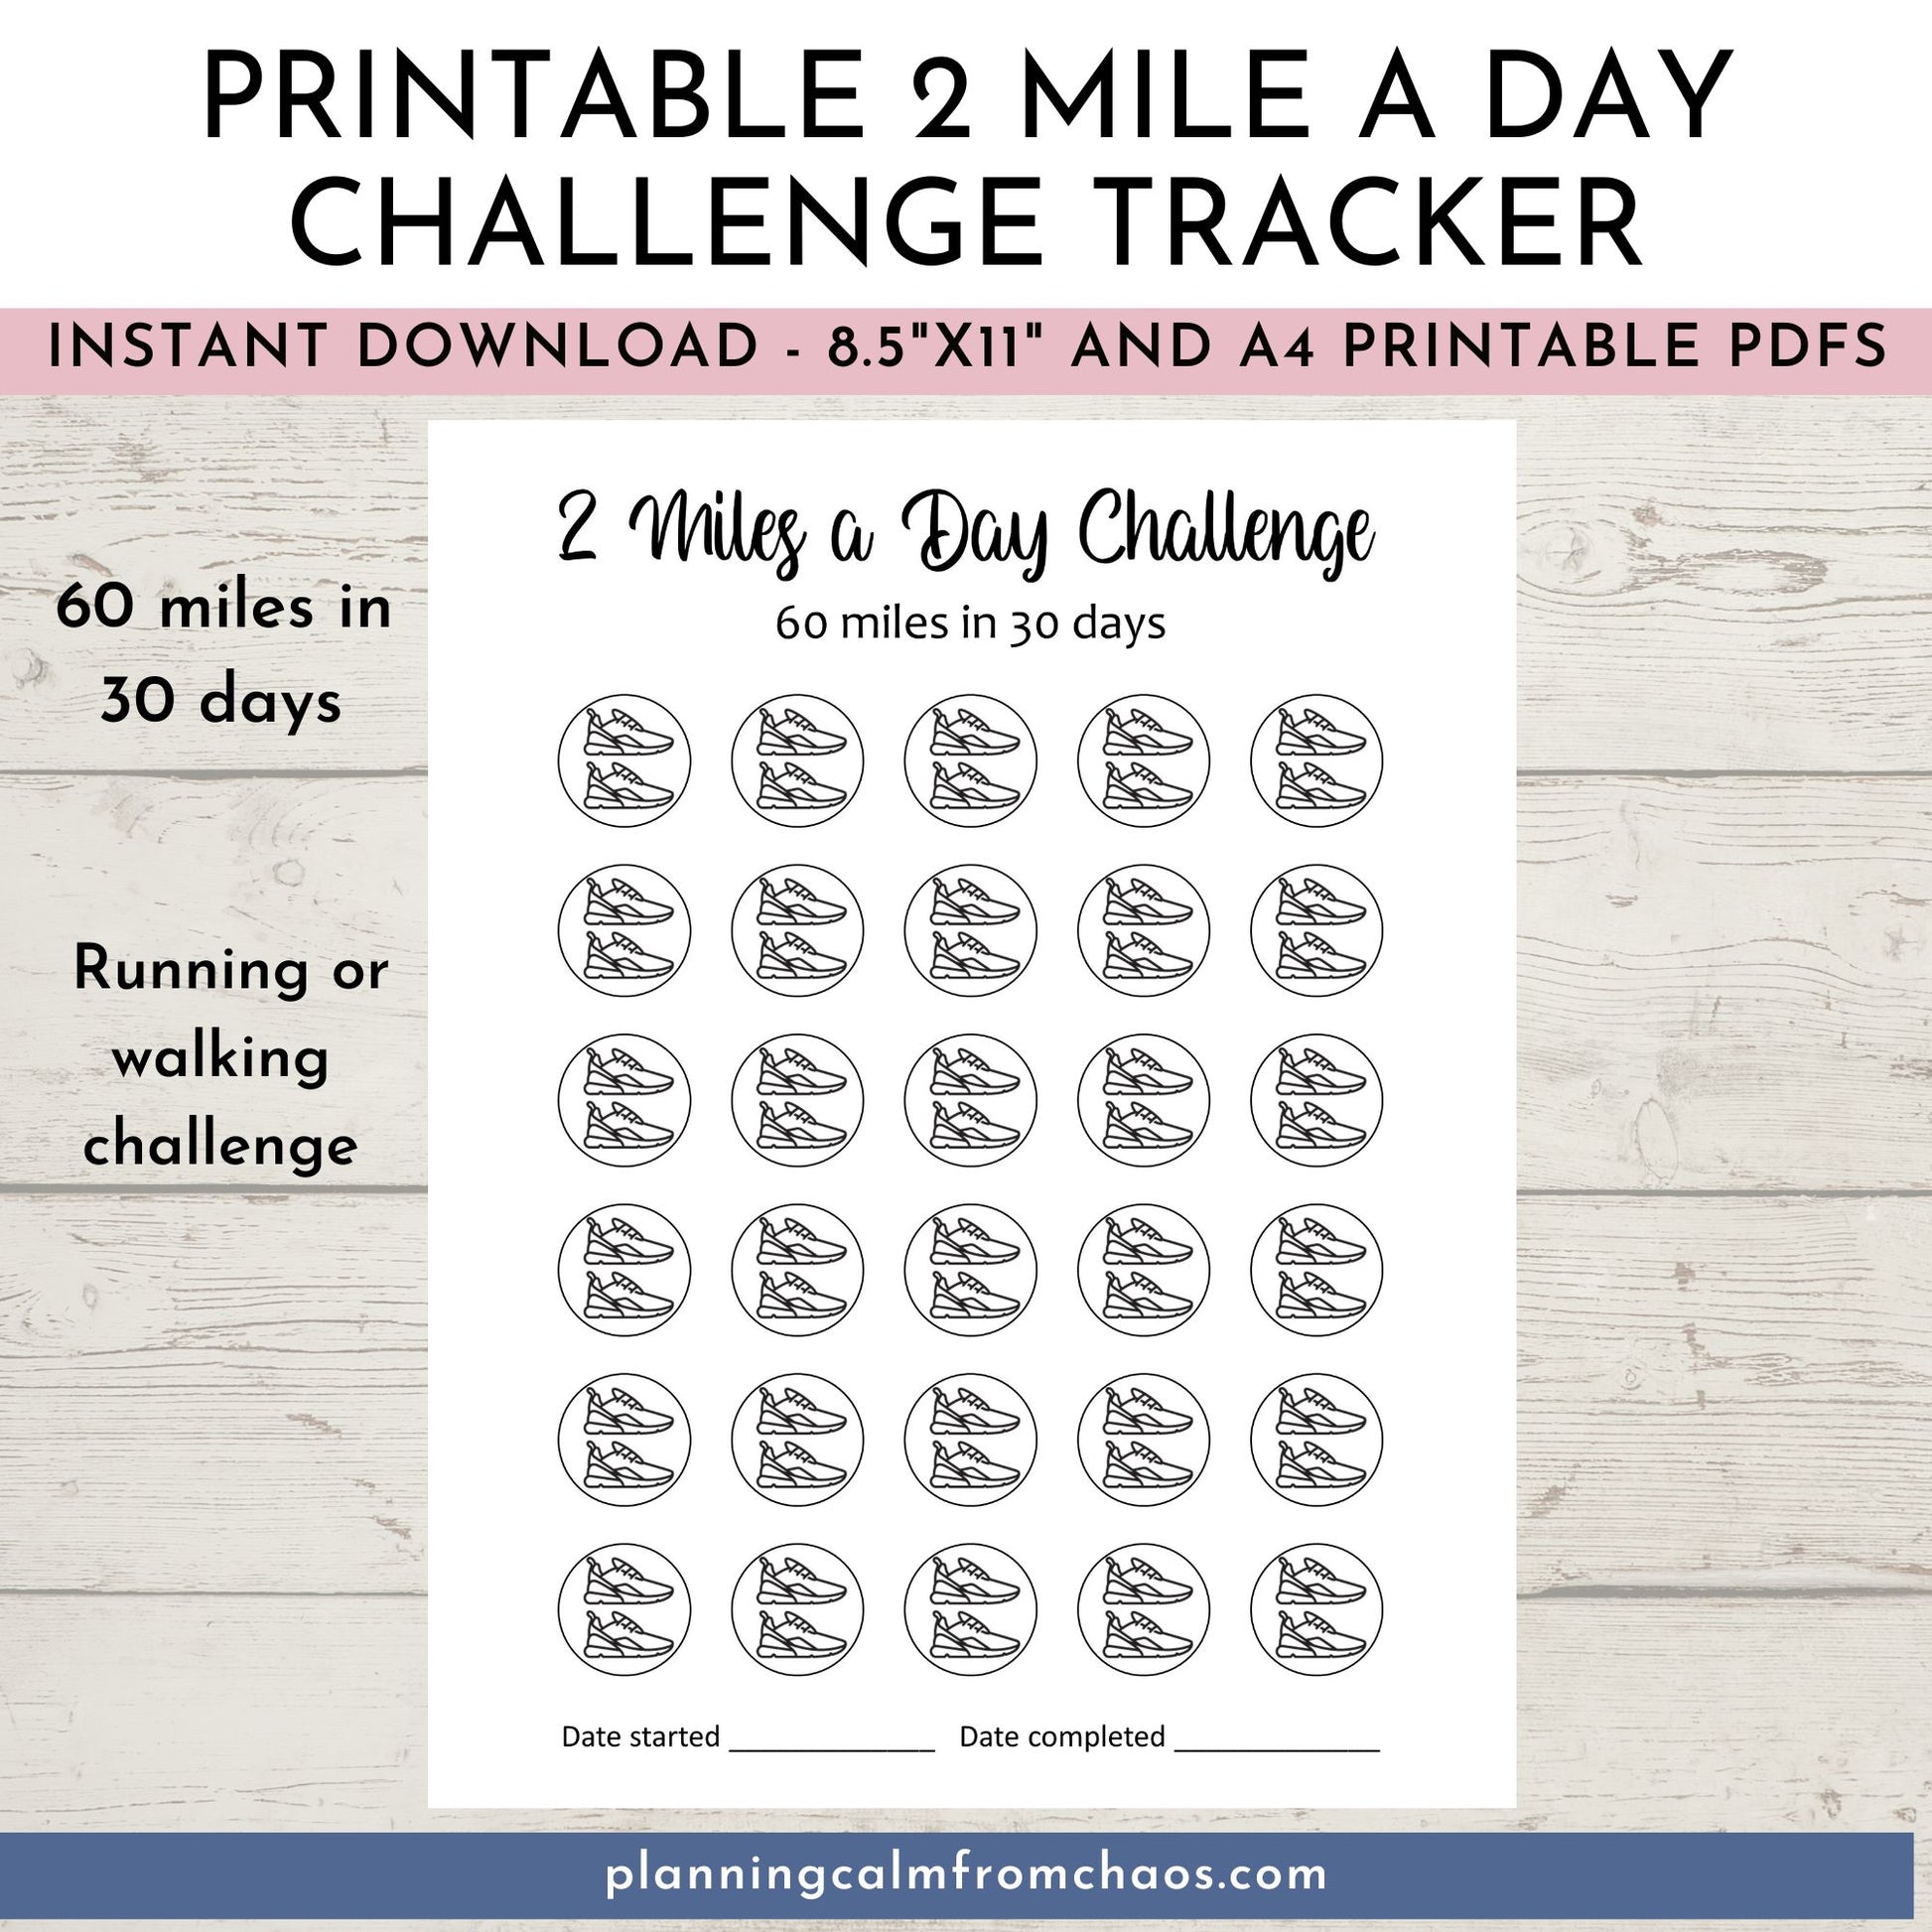 2 mile a day challenge tracker